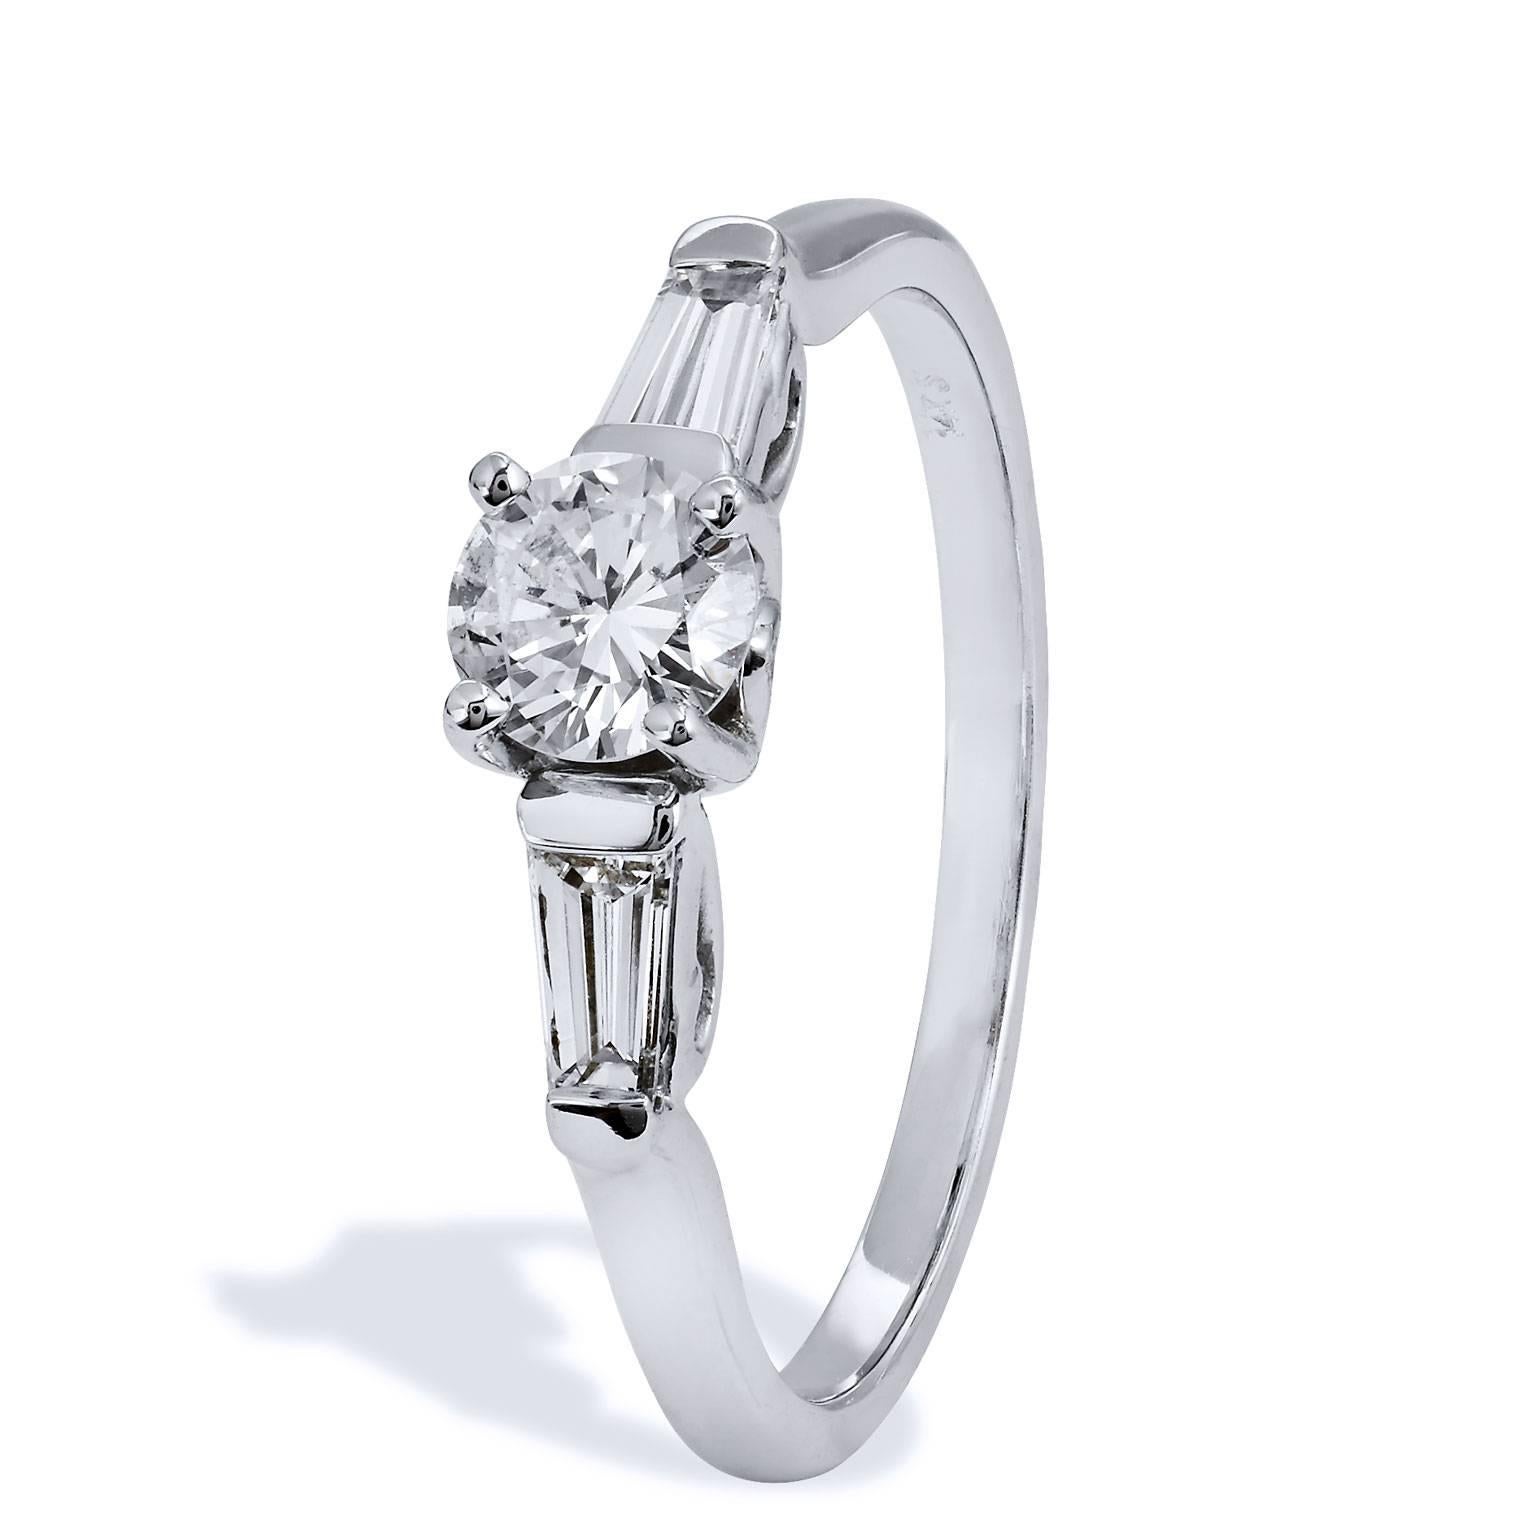 0.40 Carat Round Brilliant Cut 7 Baguette Diamond White Gold Engagement Ring 7 In New Condition For Sale In Miami, FL